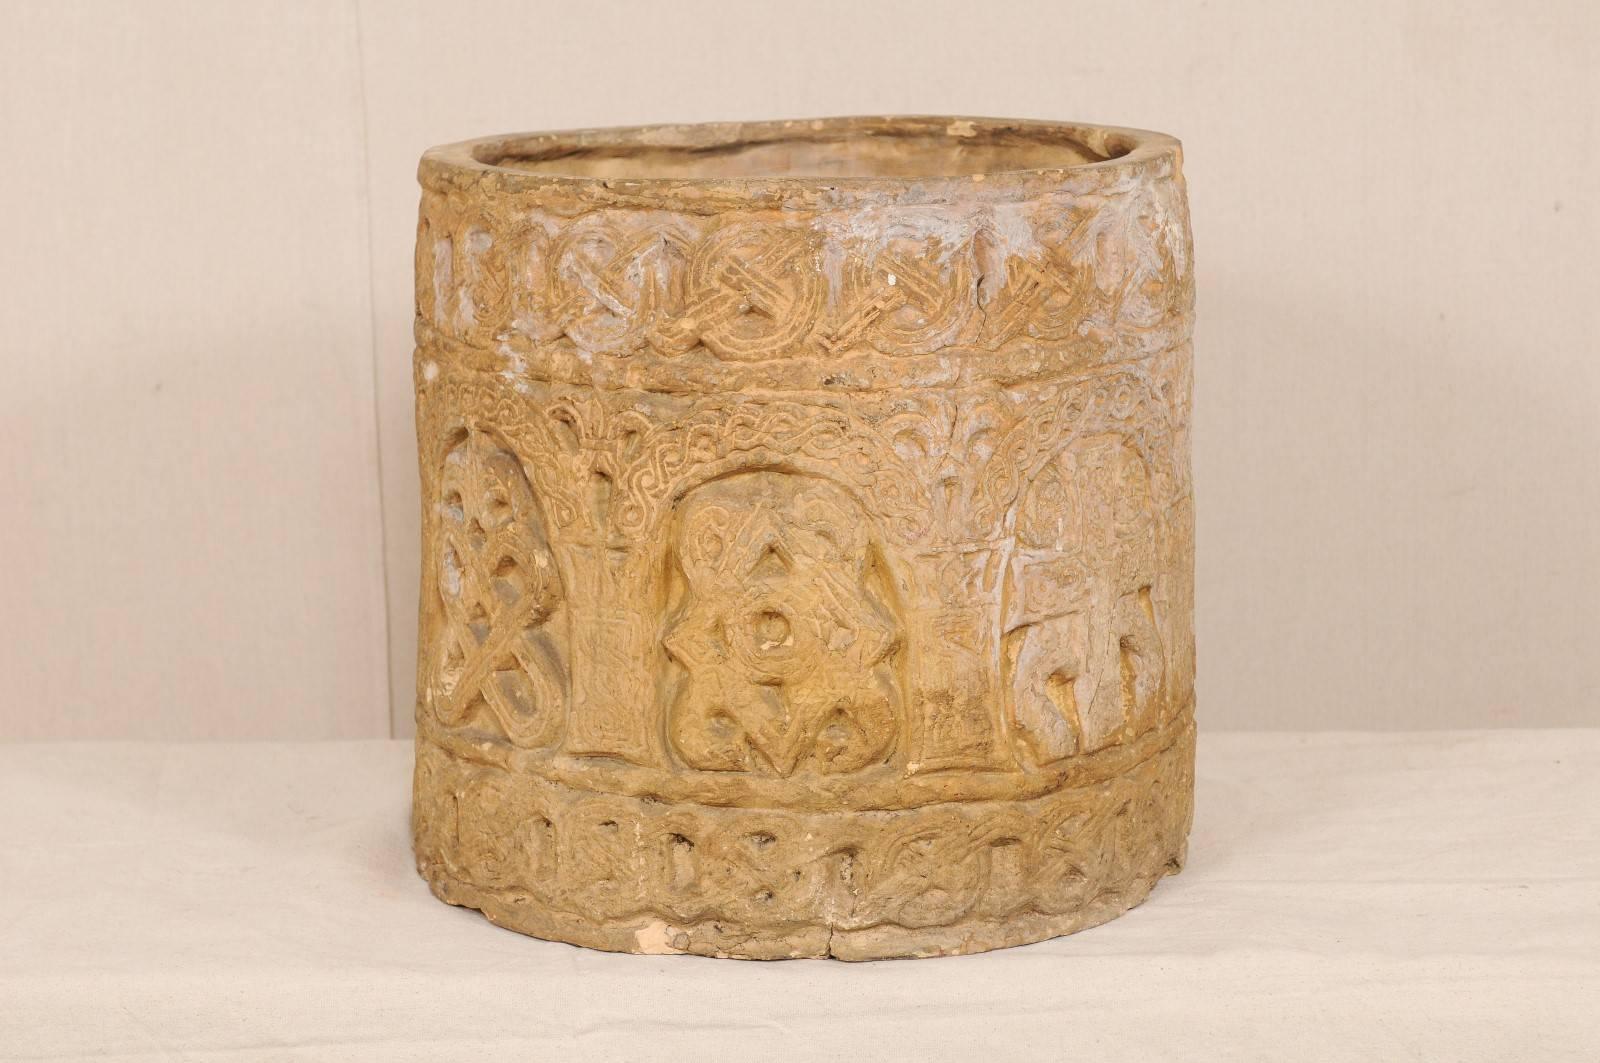 An English clay pot from the early to mid-20th century. This English pot, with it's cylindrical shaped body, features what appears to be Celtic designs carved about it's body, with knots and arches, giving it a medieval appearance. There are